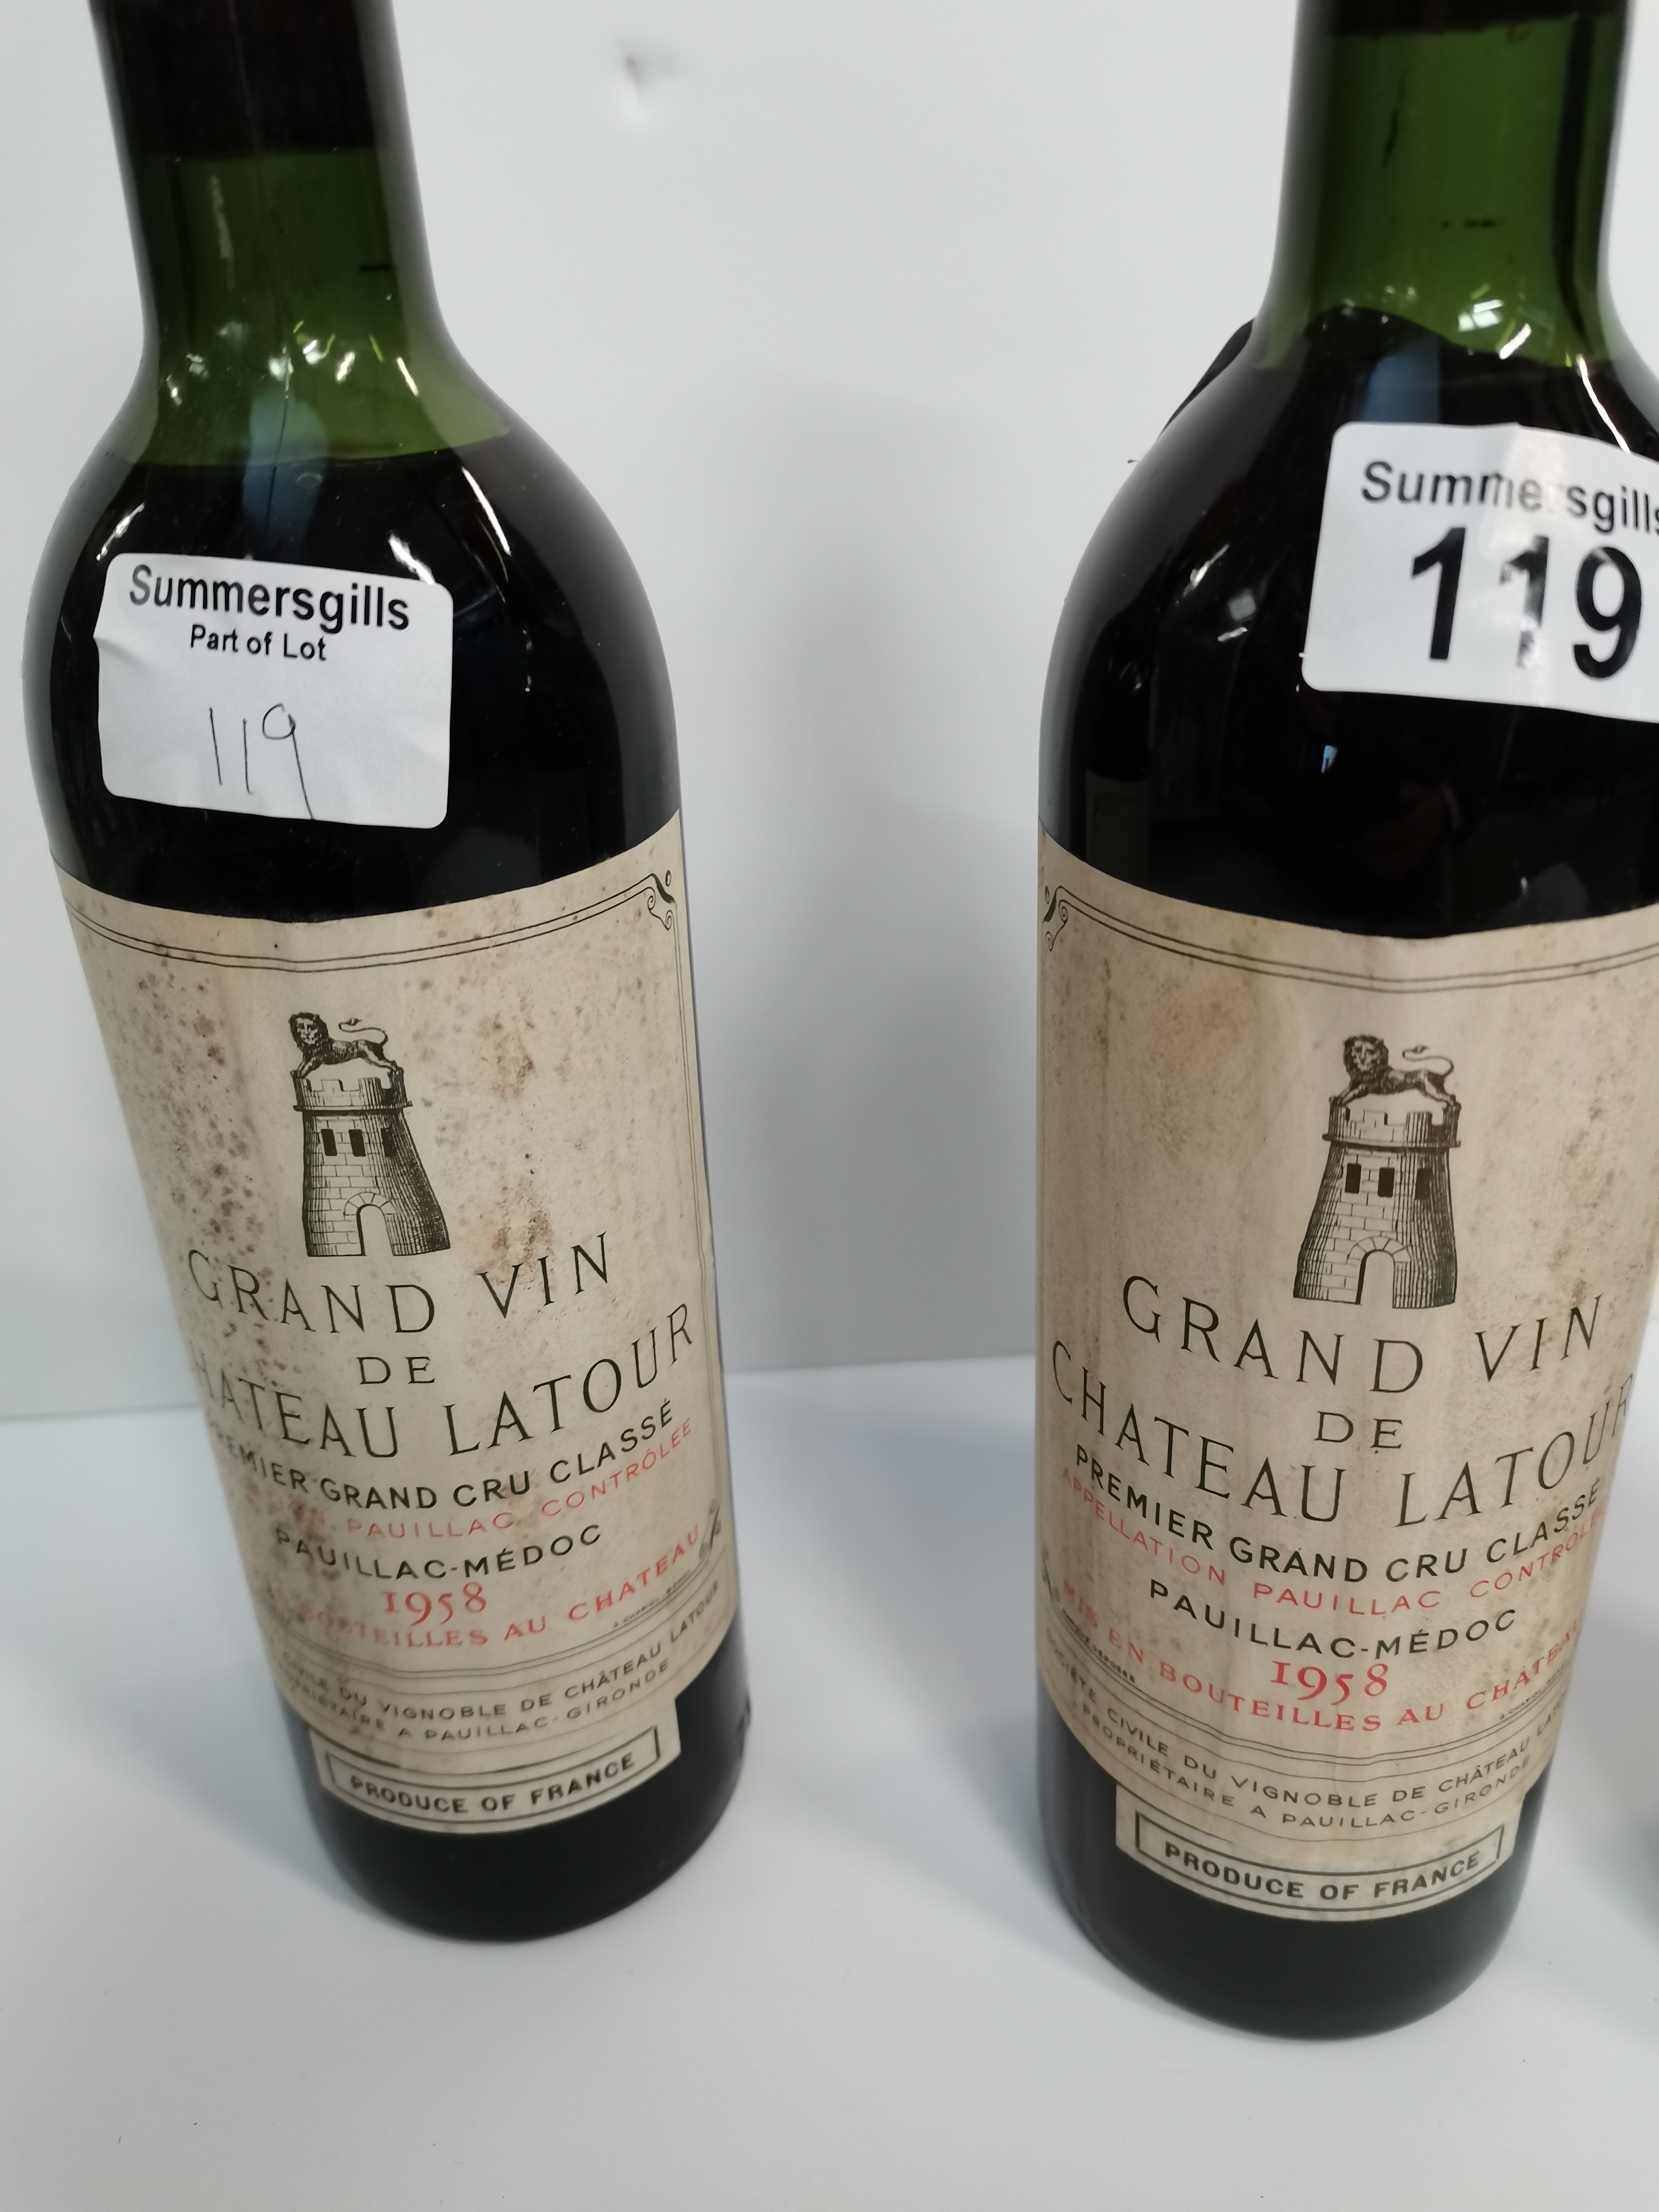 x2 bottles of Grand vin de Chateau Latour 1958 and a bottle of Dows port - Image 3 of 12